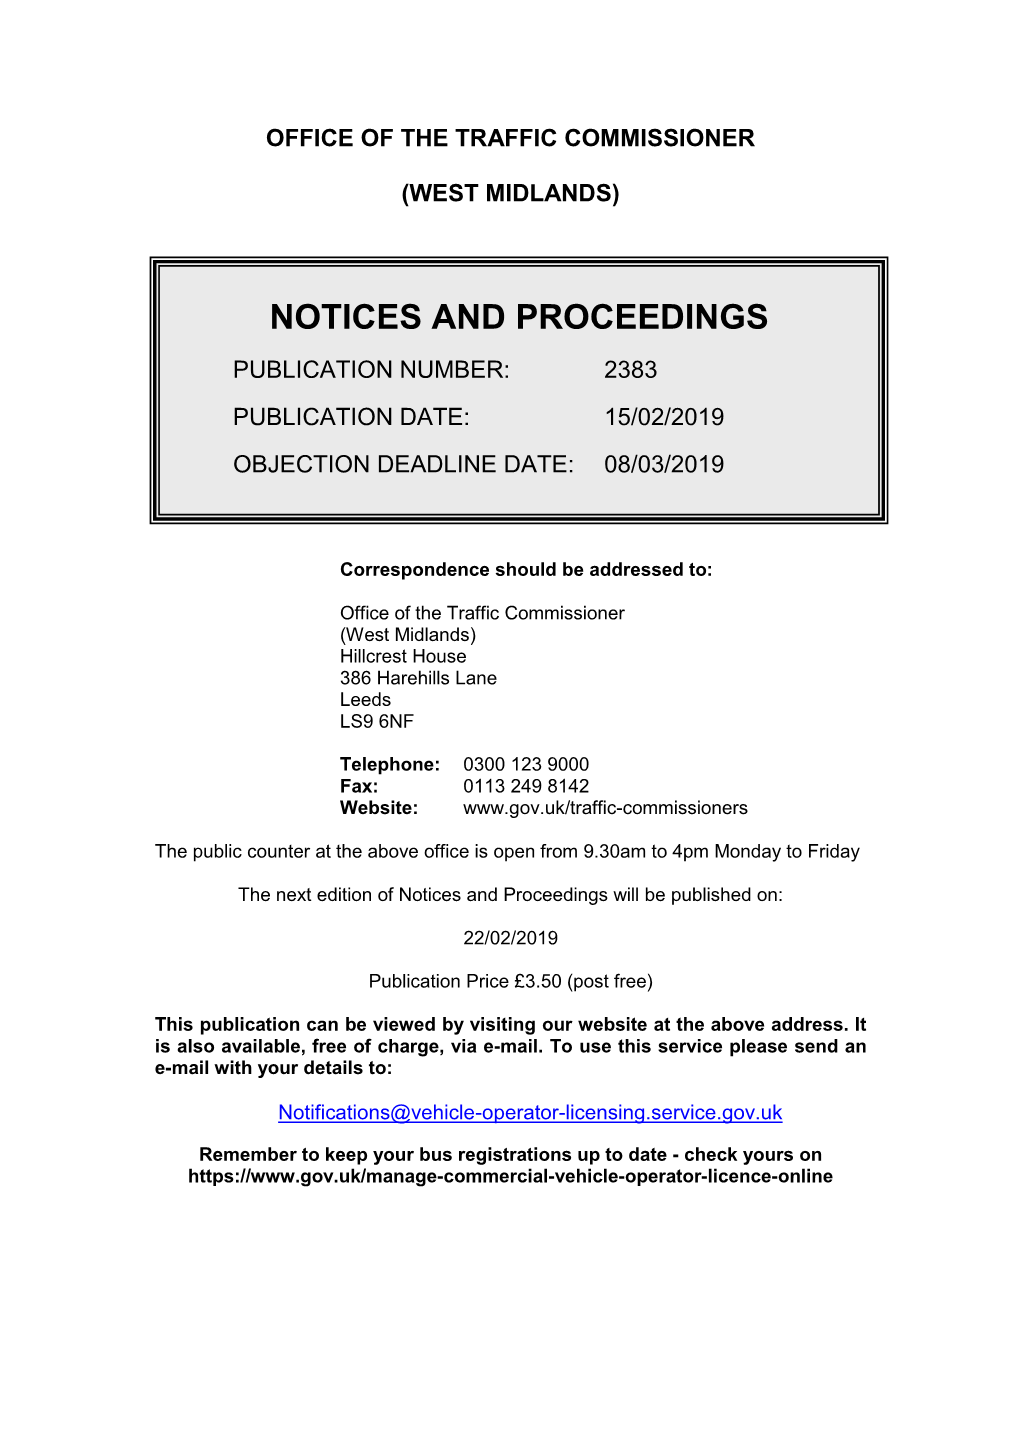 Notices and Proceedings for West Midlands